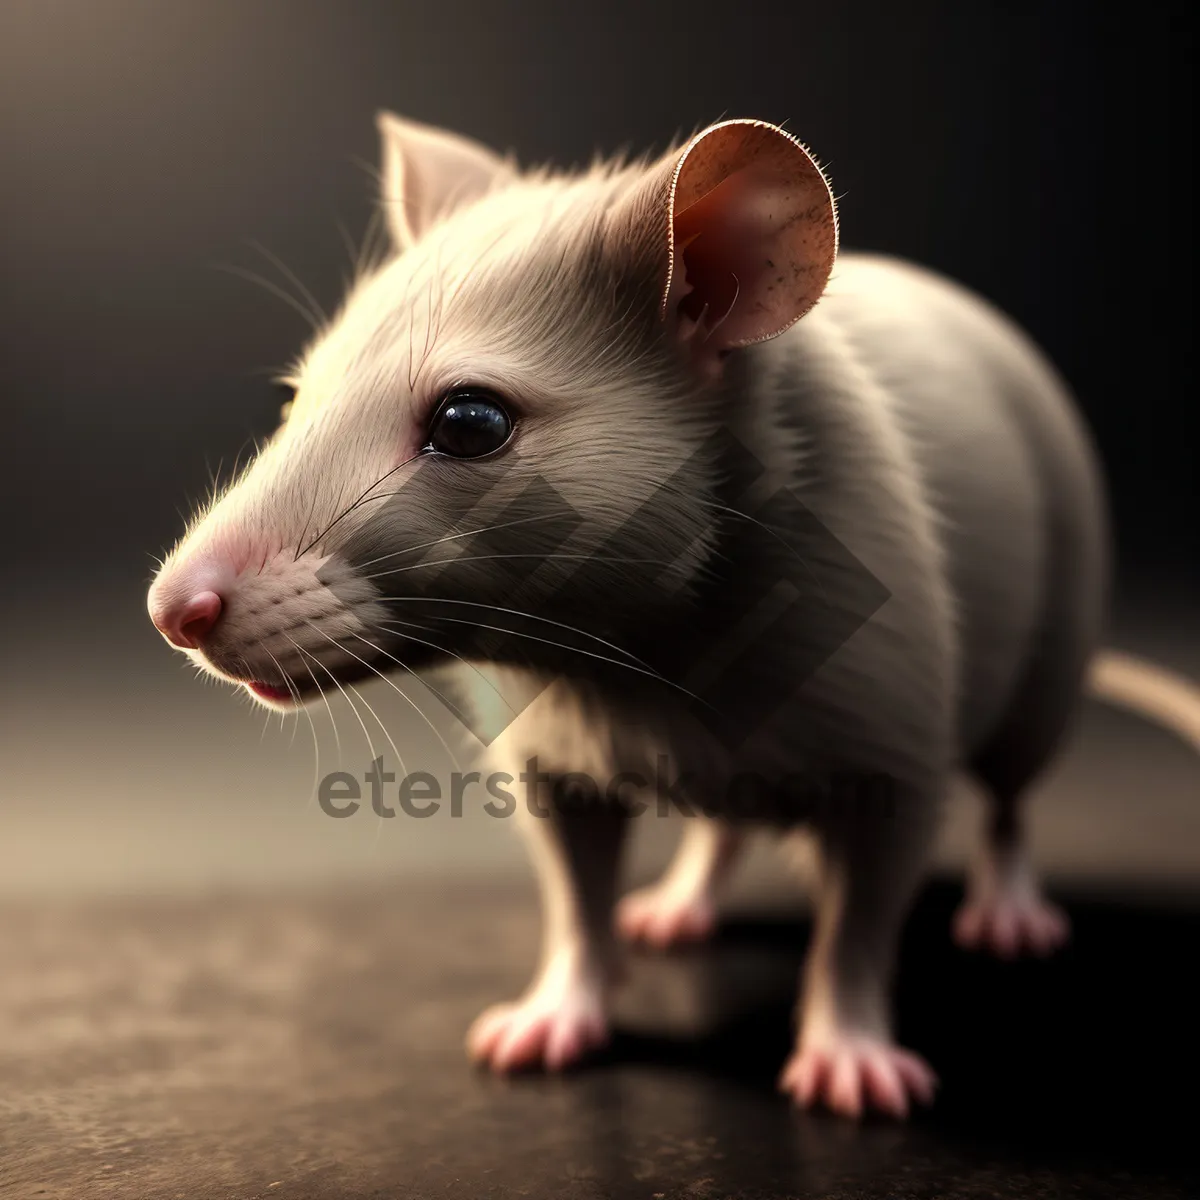 Picture of Charming furry critter with adorable whiskers